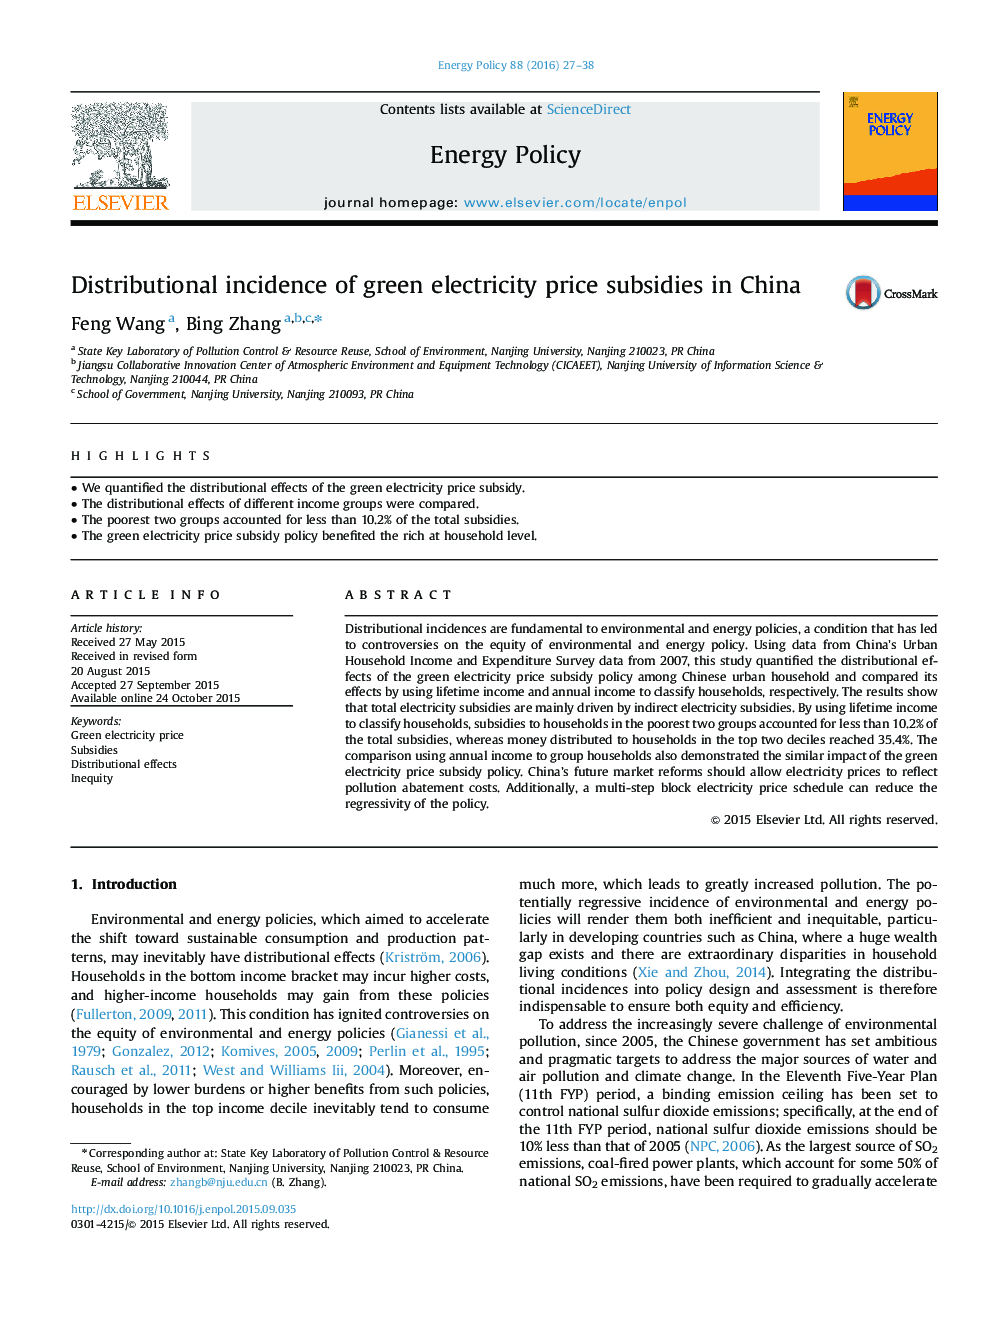 Distributional incidence of green electricity price subsidies in China